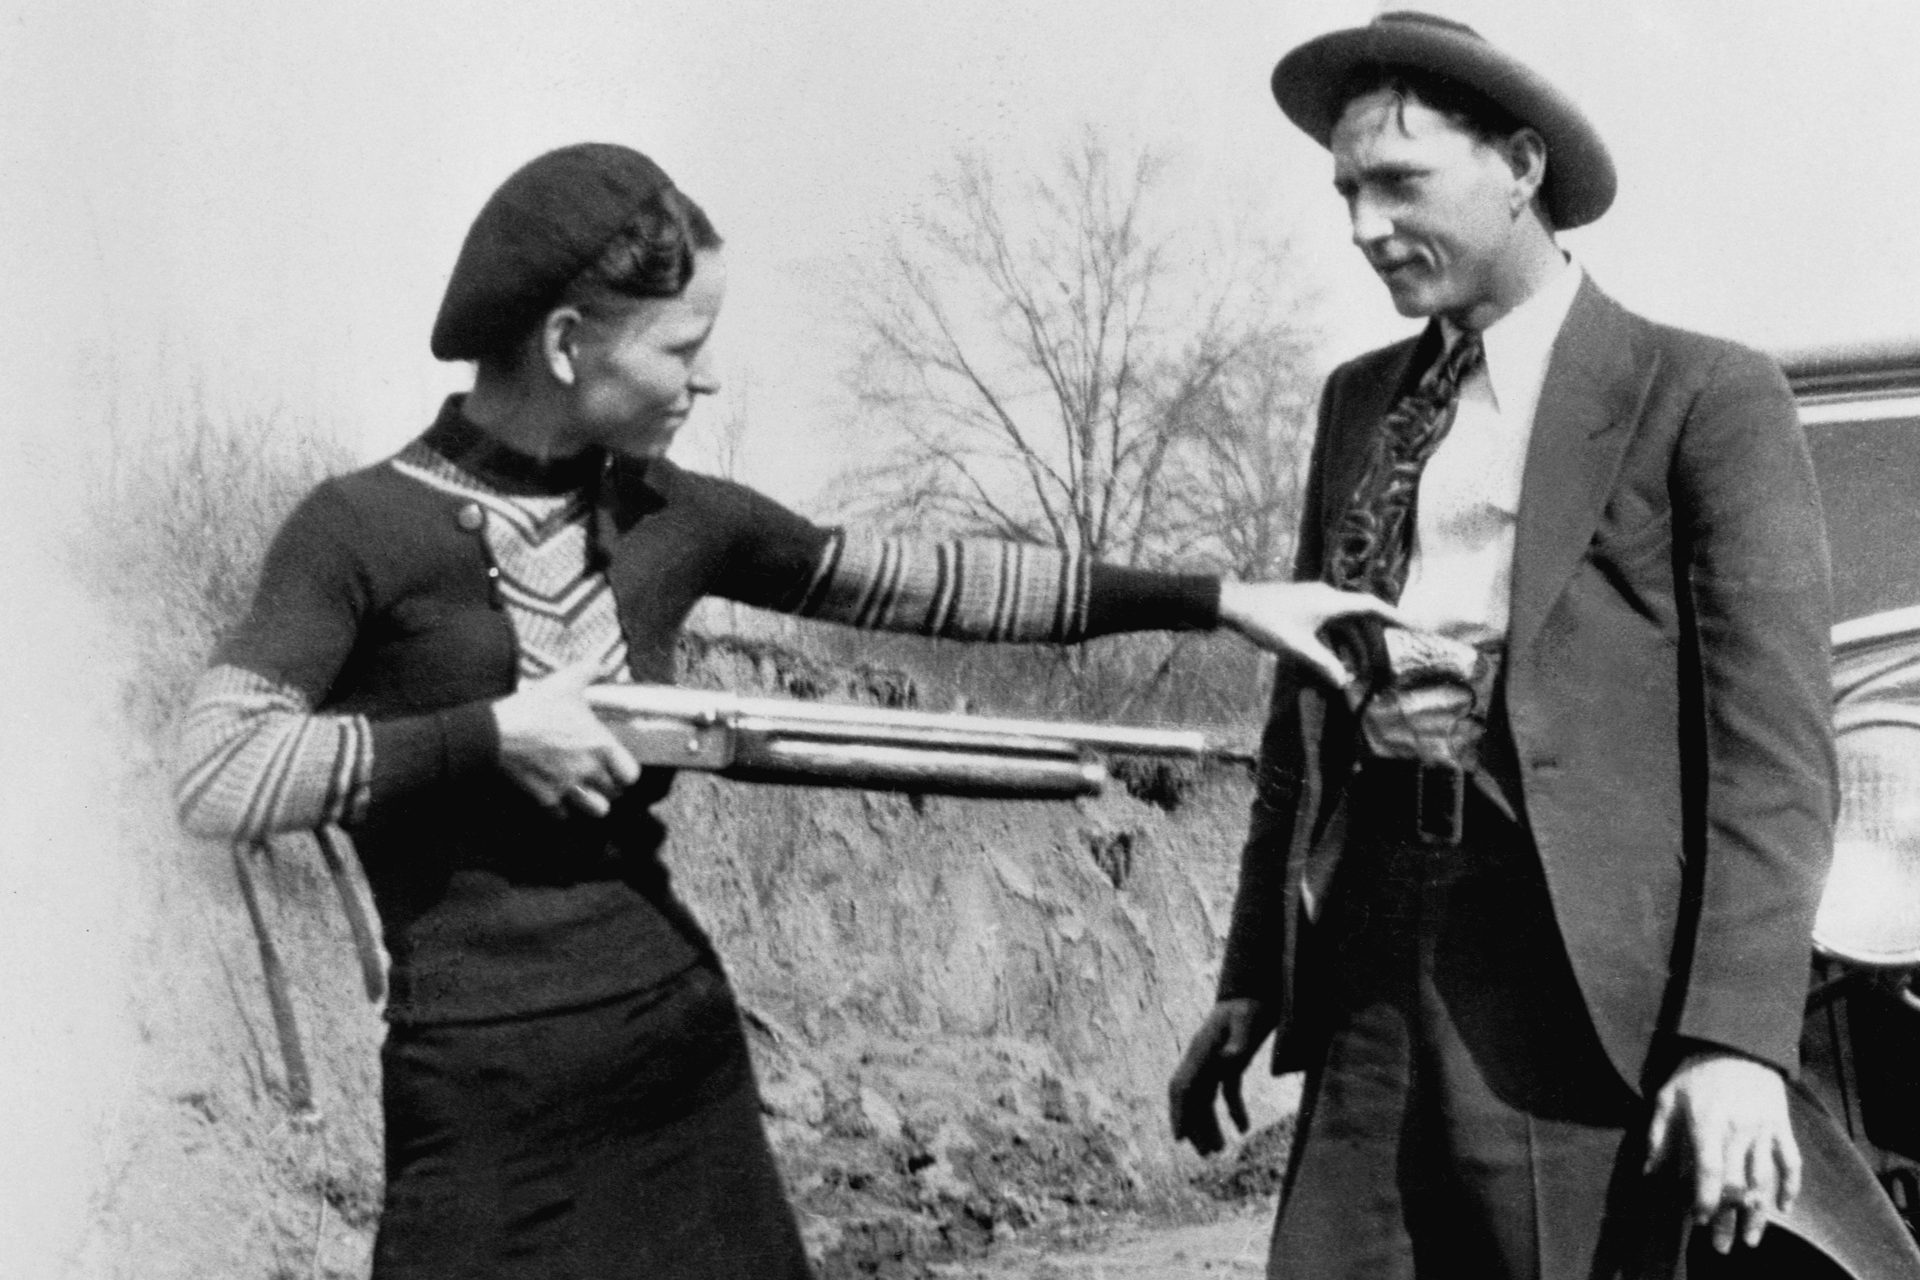 90 Years Ago Today: The Bonnie and Clyde Ambush